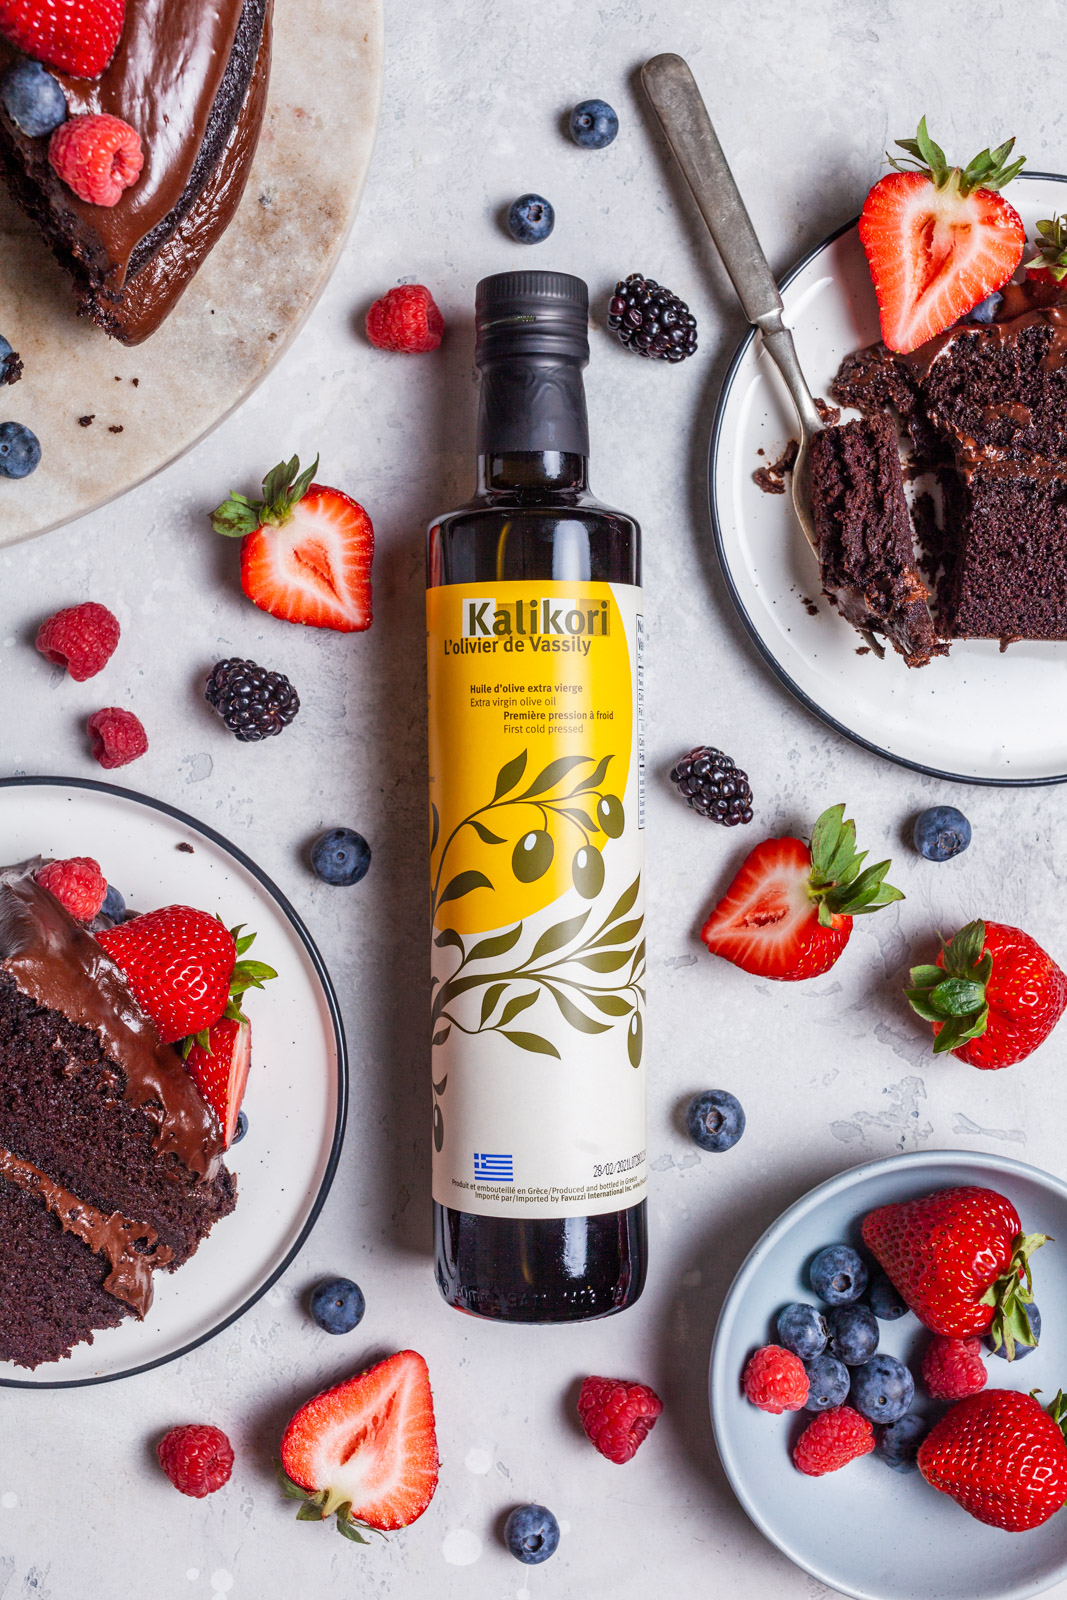 Vegan Chocolate Olive Oil Cake With Olive Oil Frosting